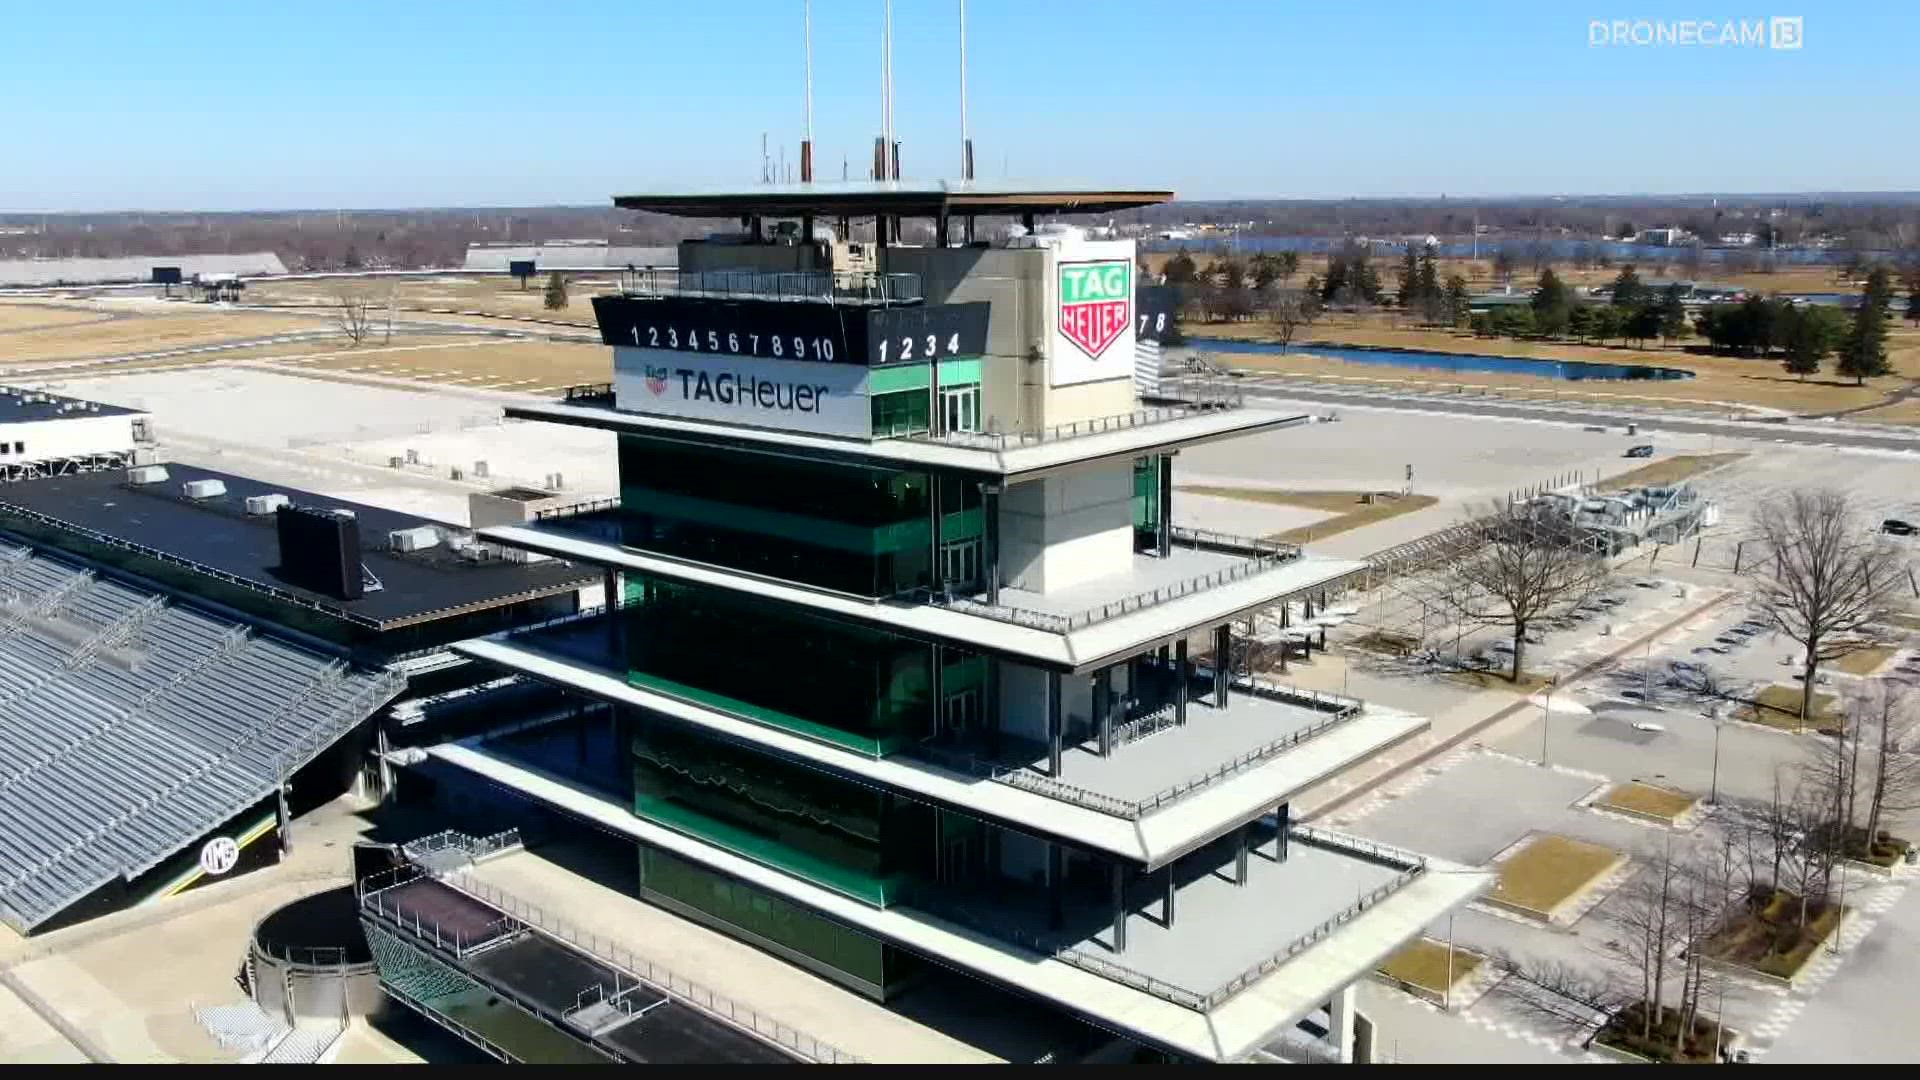 IndyCar and NASCAR will both be racing at IMS this weekend.